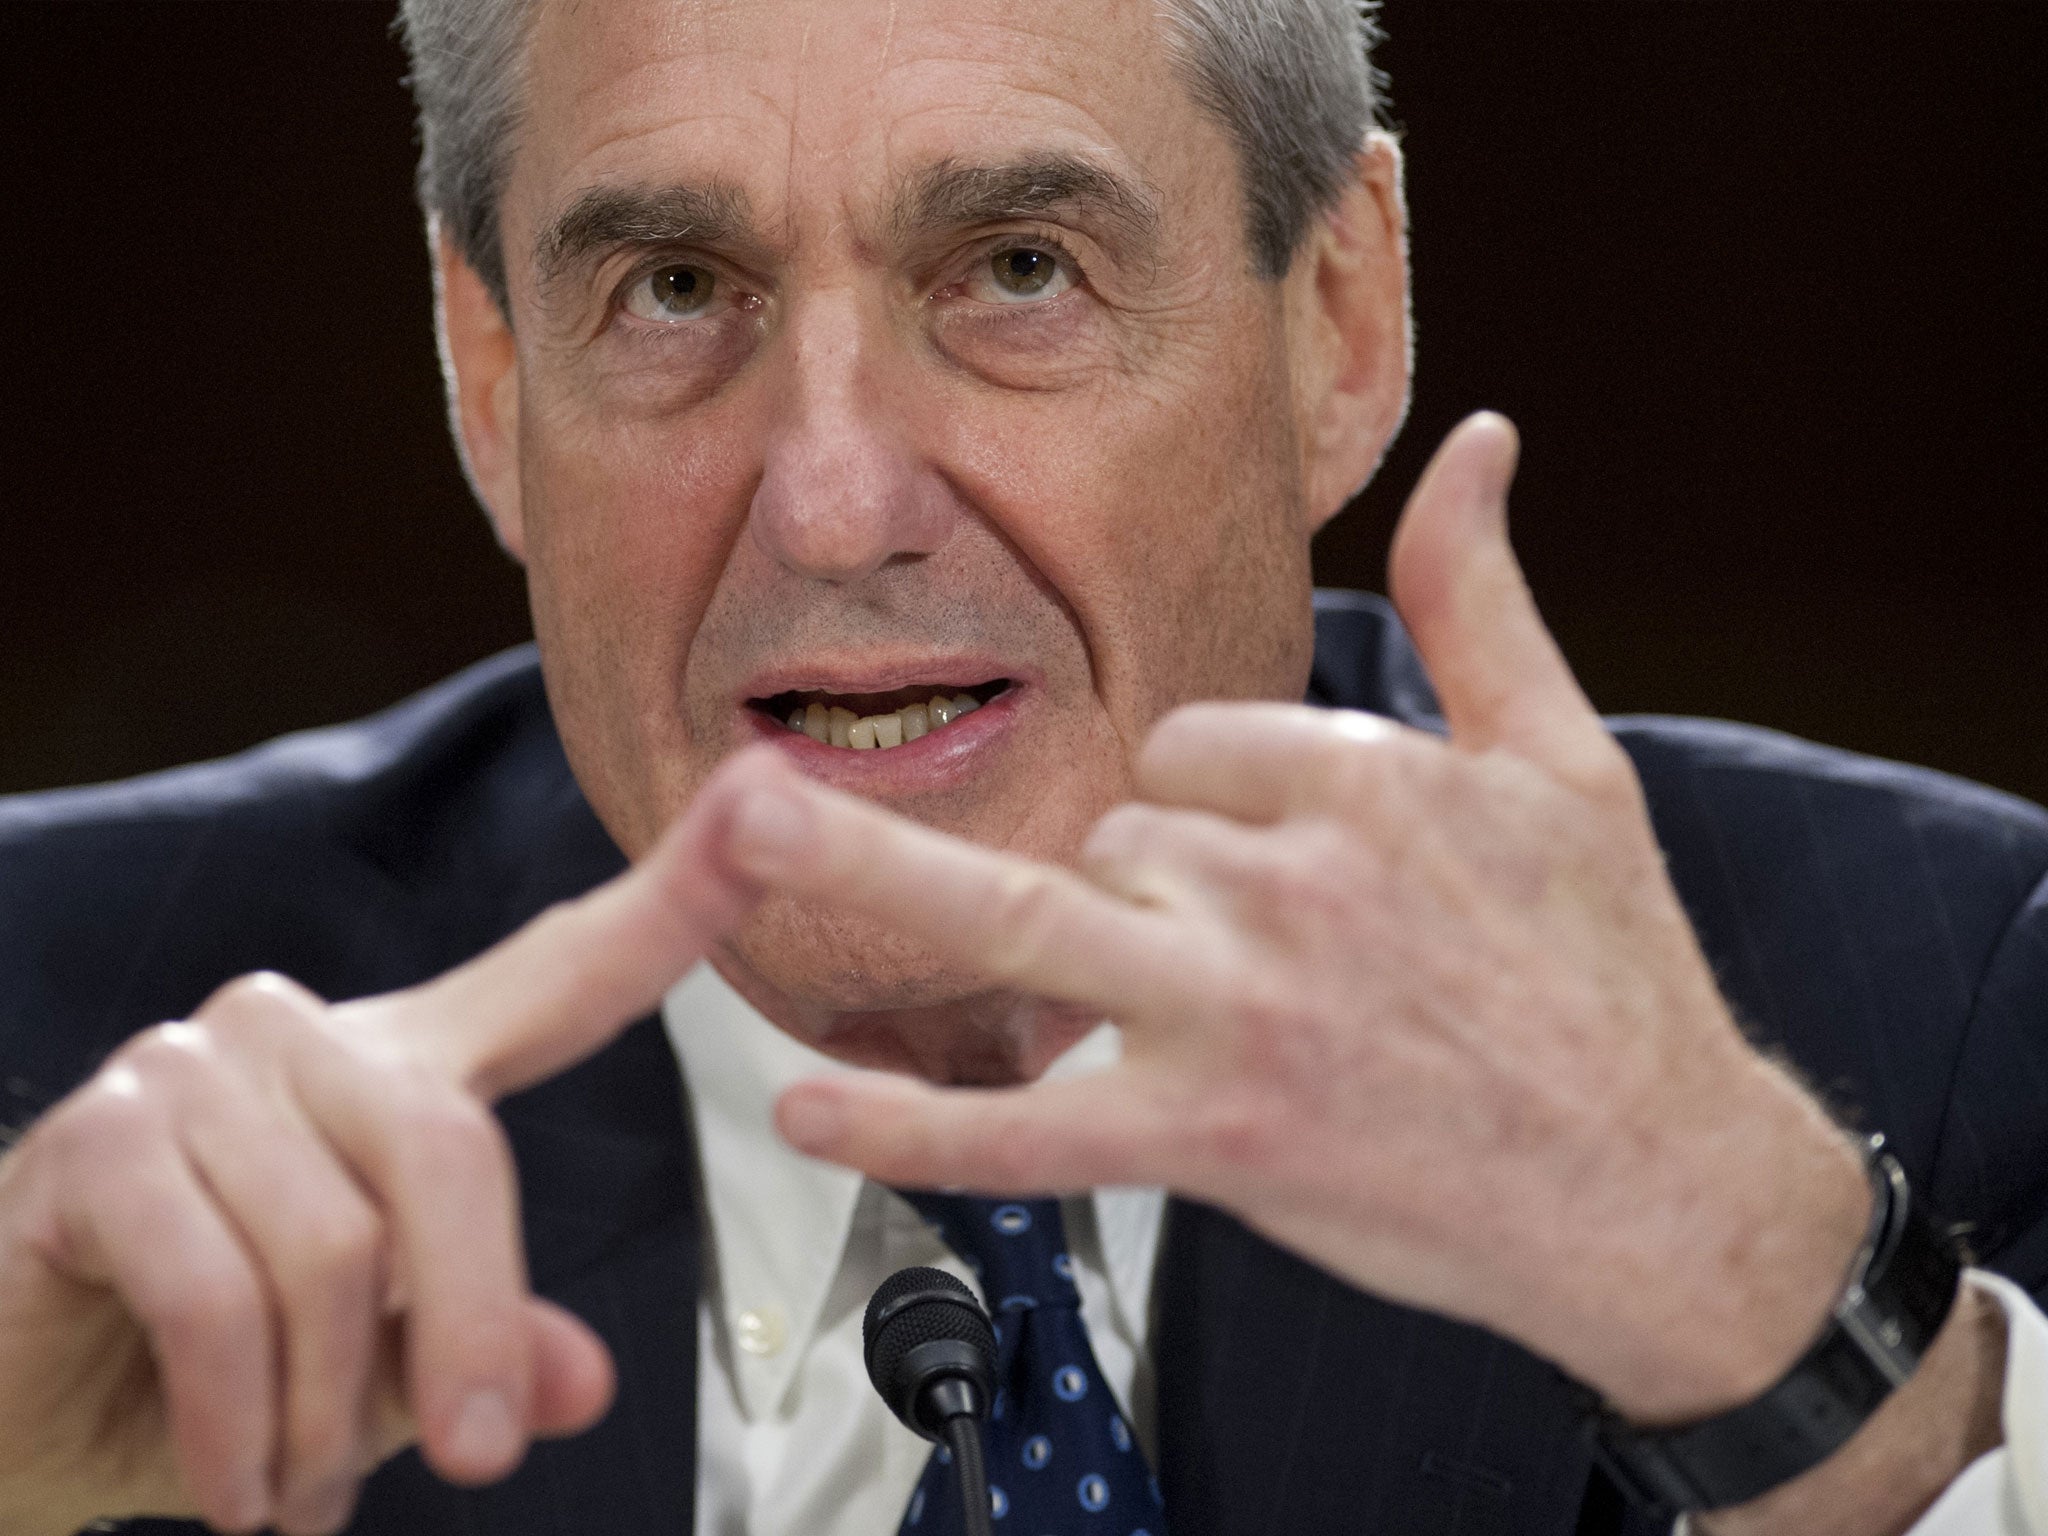 Robert Mueller is investigating alleged Russia interference in the presidential election and possible collusion with the Trump campaign